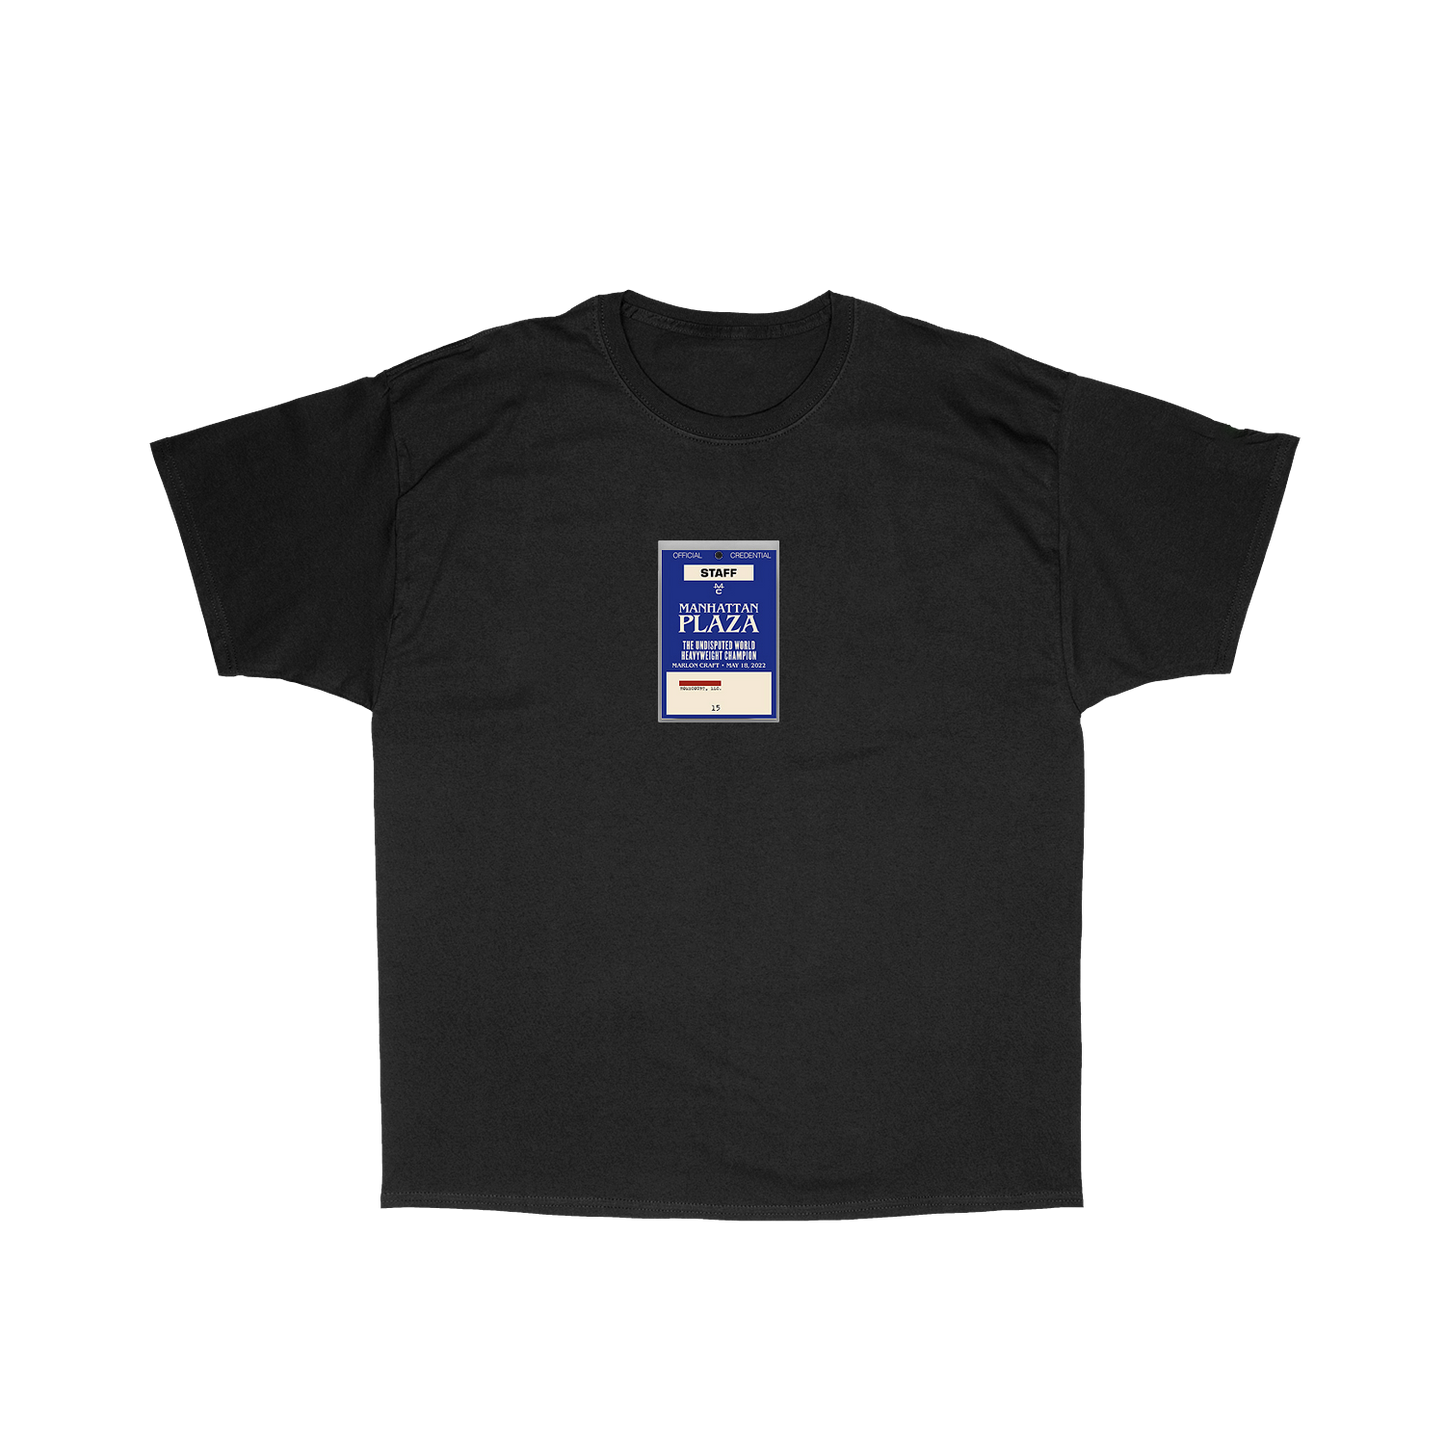 Official Credential (Black T-Shirt)